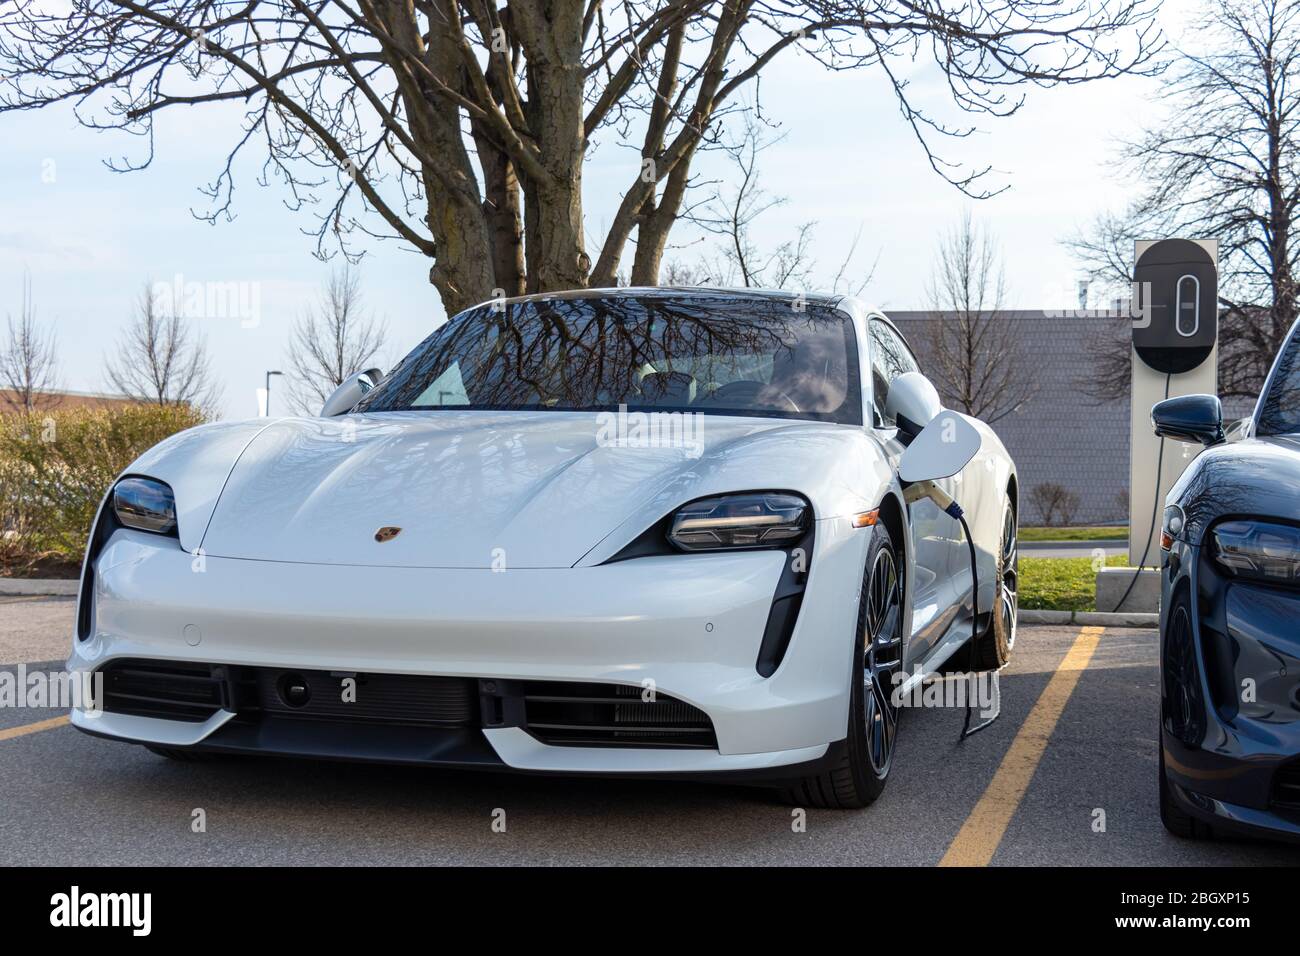 White Porsche Taycan Turbo seen plugged in, charging at a Porsche dealership. Stock Photo